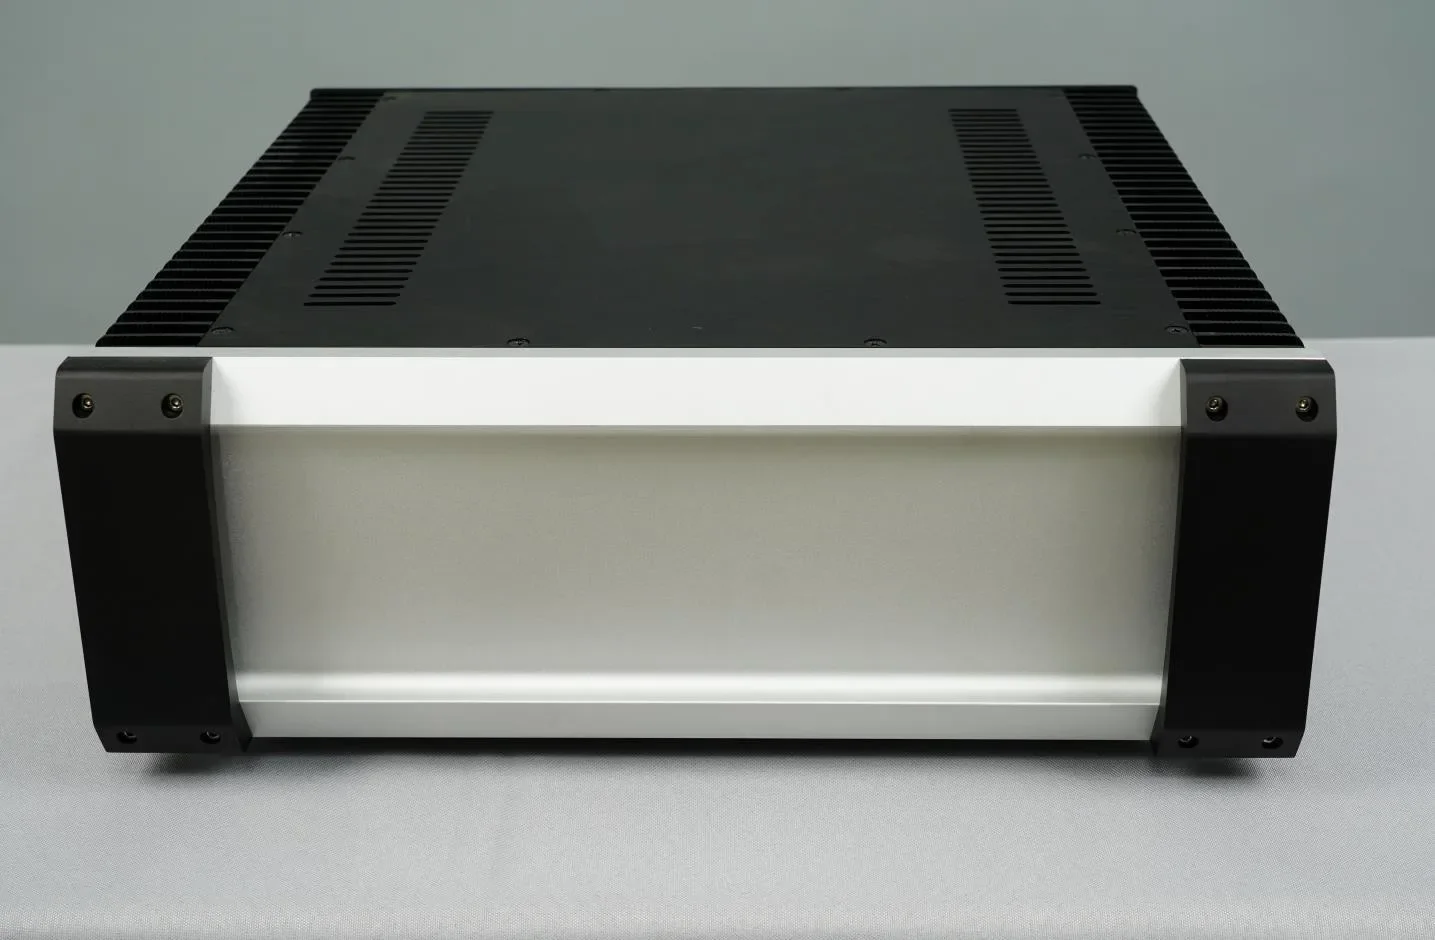 

Dajia power amplifier box pure rear stage Nbz15 heat dissipation aluminum chassis on both sides